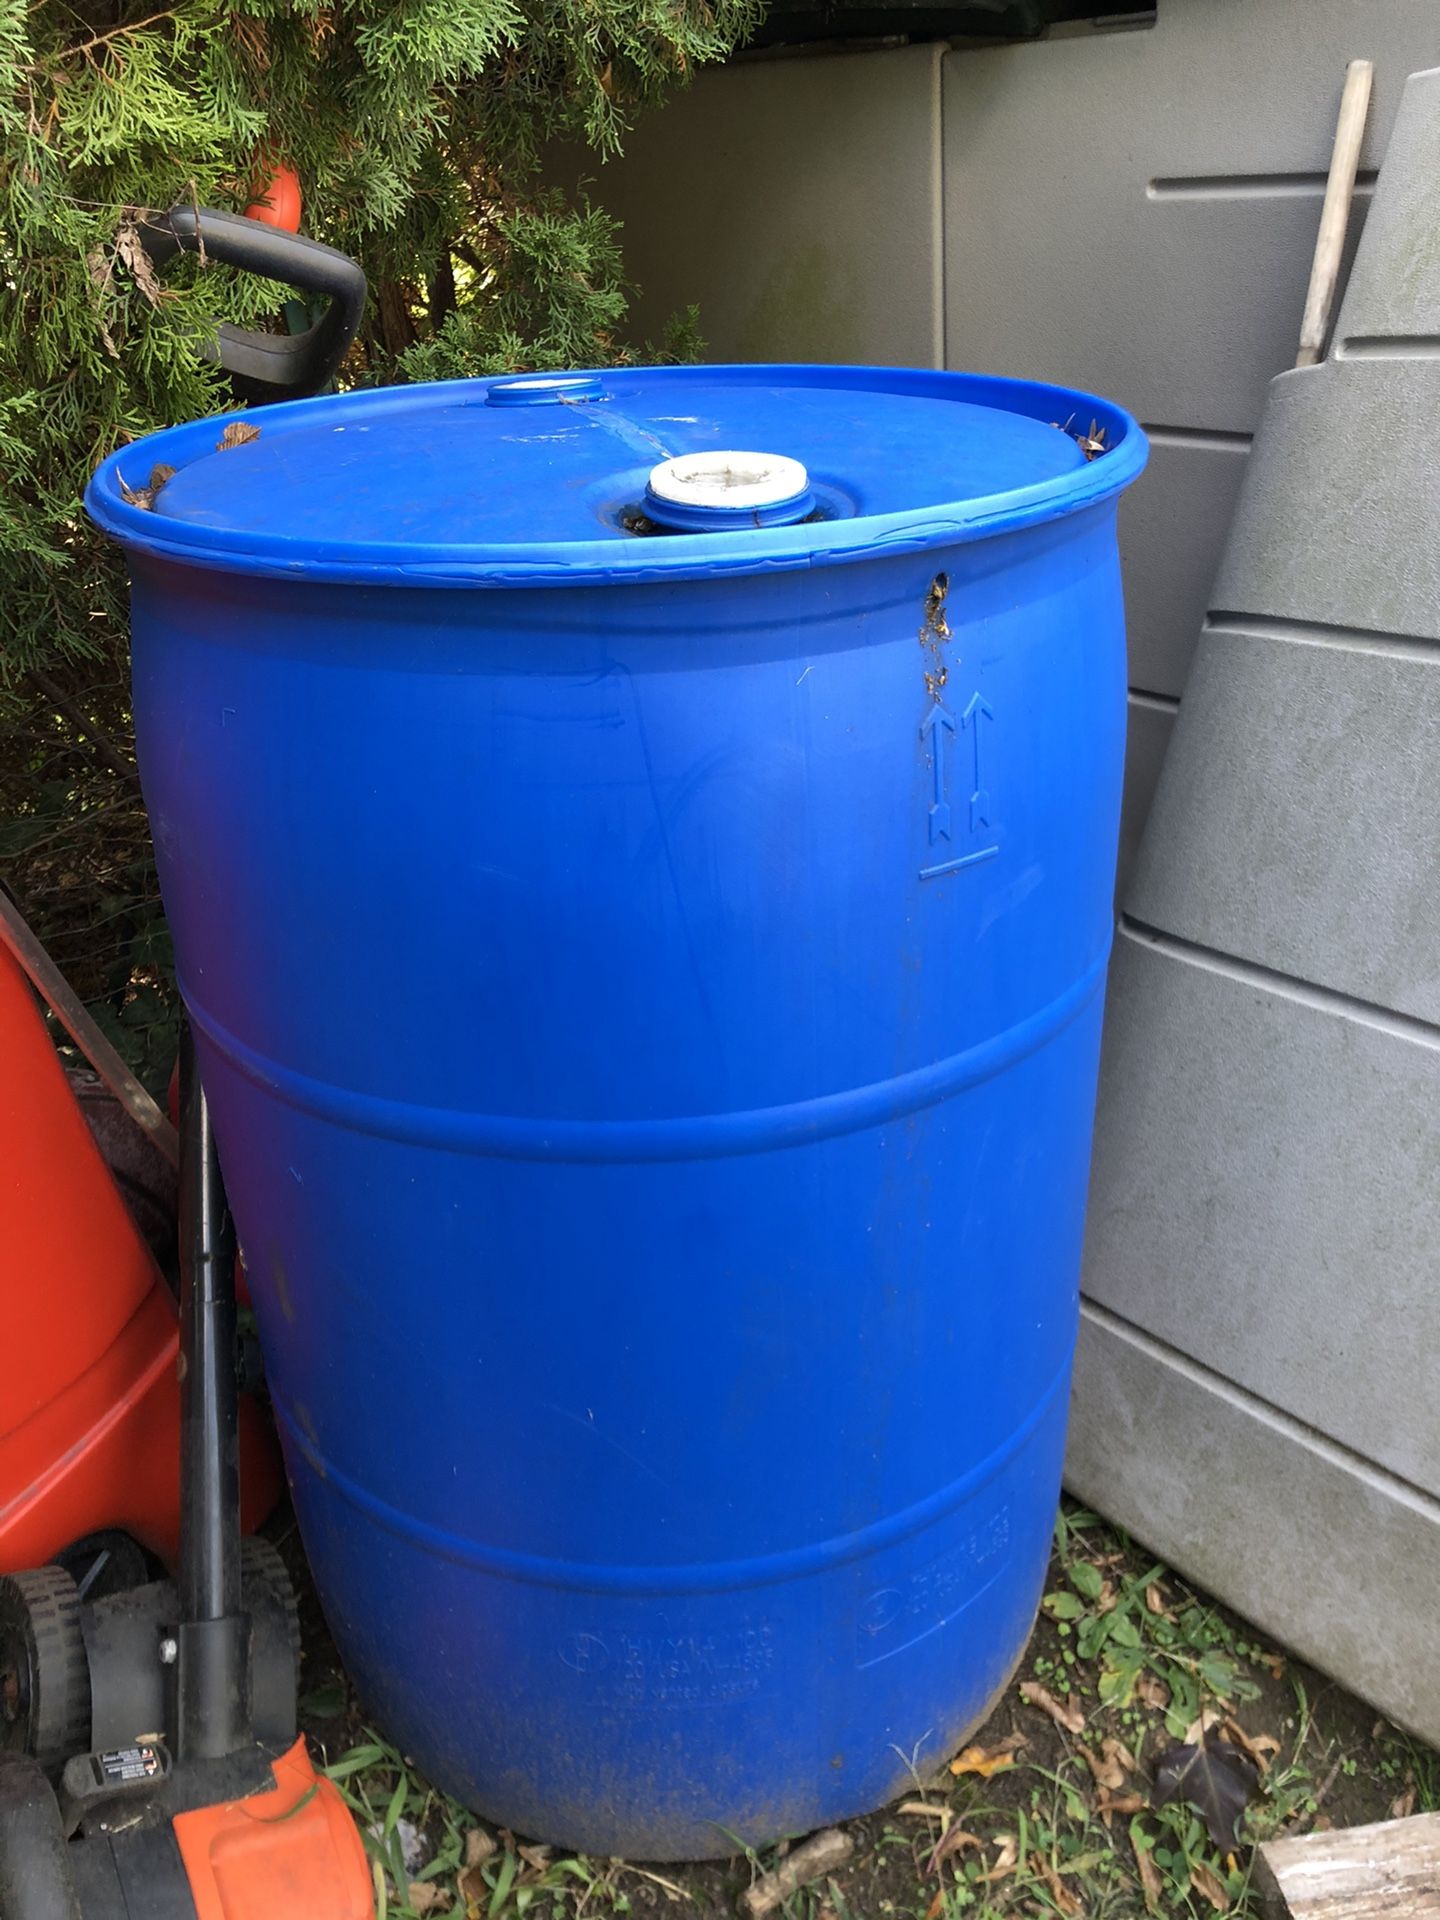 55 gallon drum never used